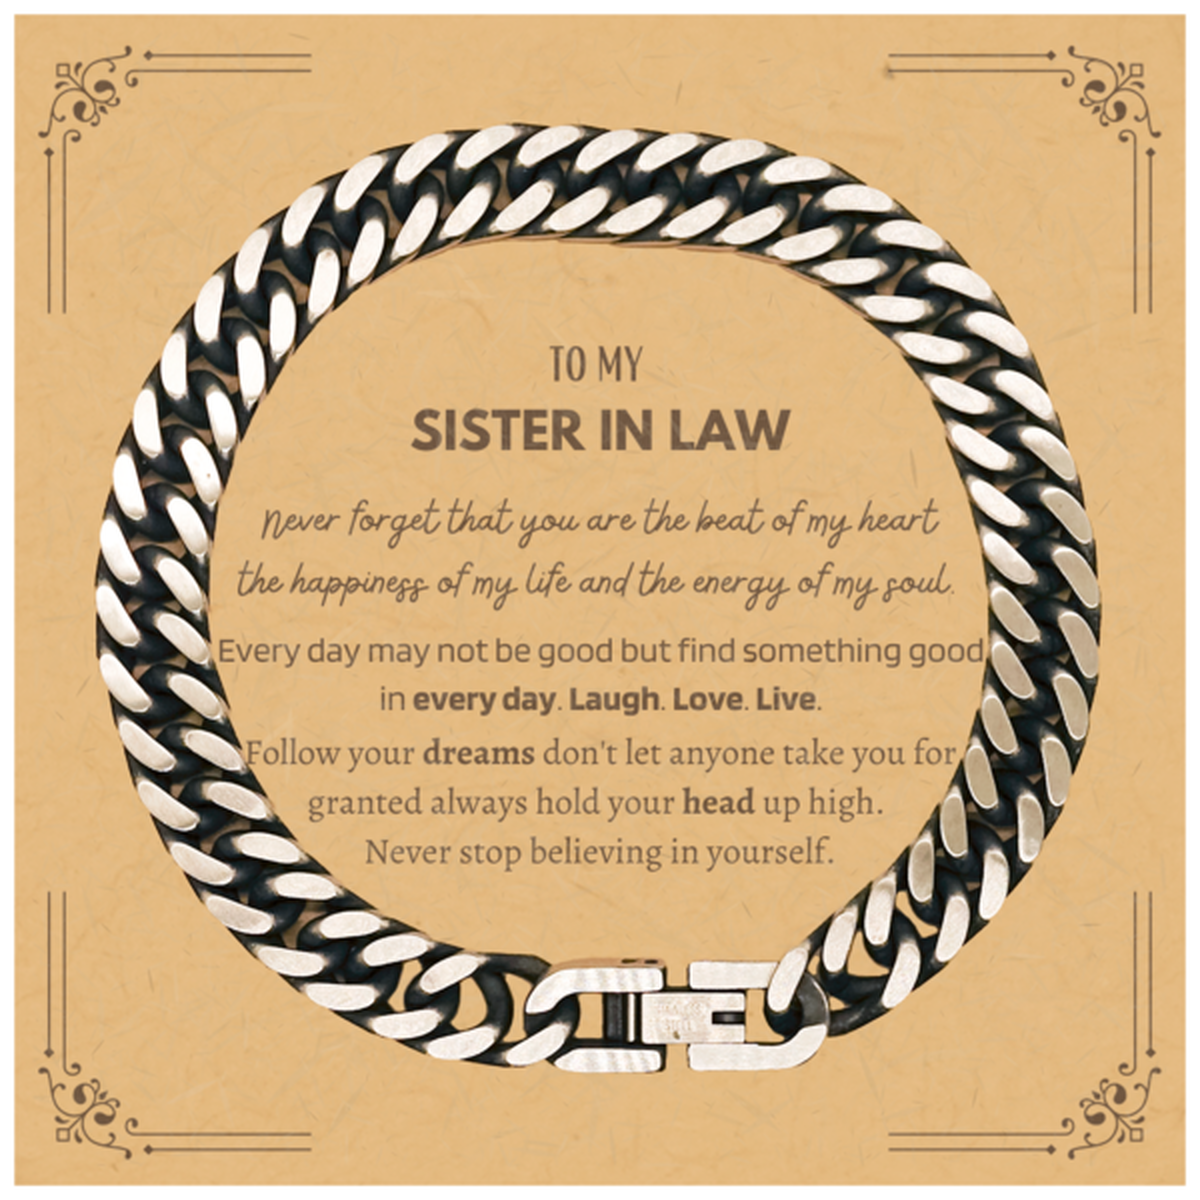 To My Sister In Law Message Card Gifts, Christmas Sister In Law Cuban Link Chain Bracelet Present, Birthday Unique Motivational For Sister In Law, To My Sister In Law Never forget that you are the beat of my heart the happiness of my life and the energy o